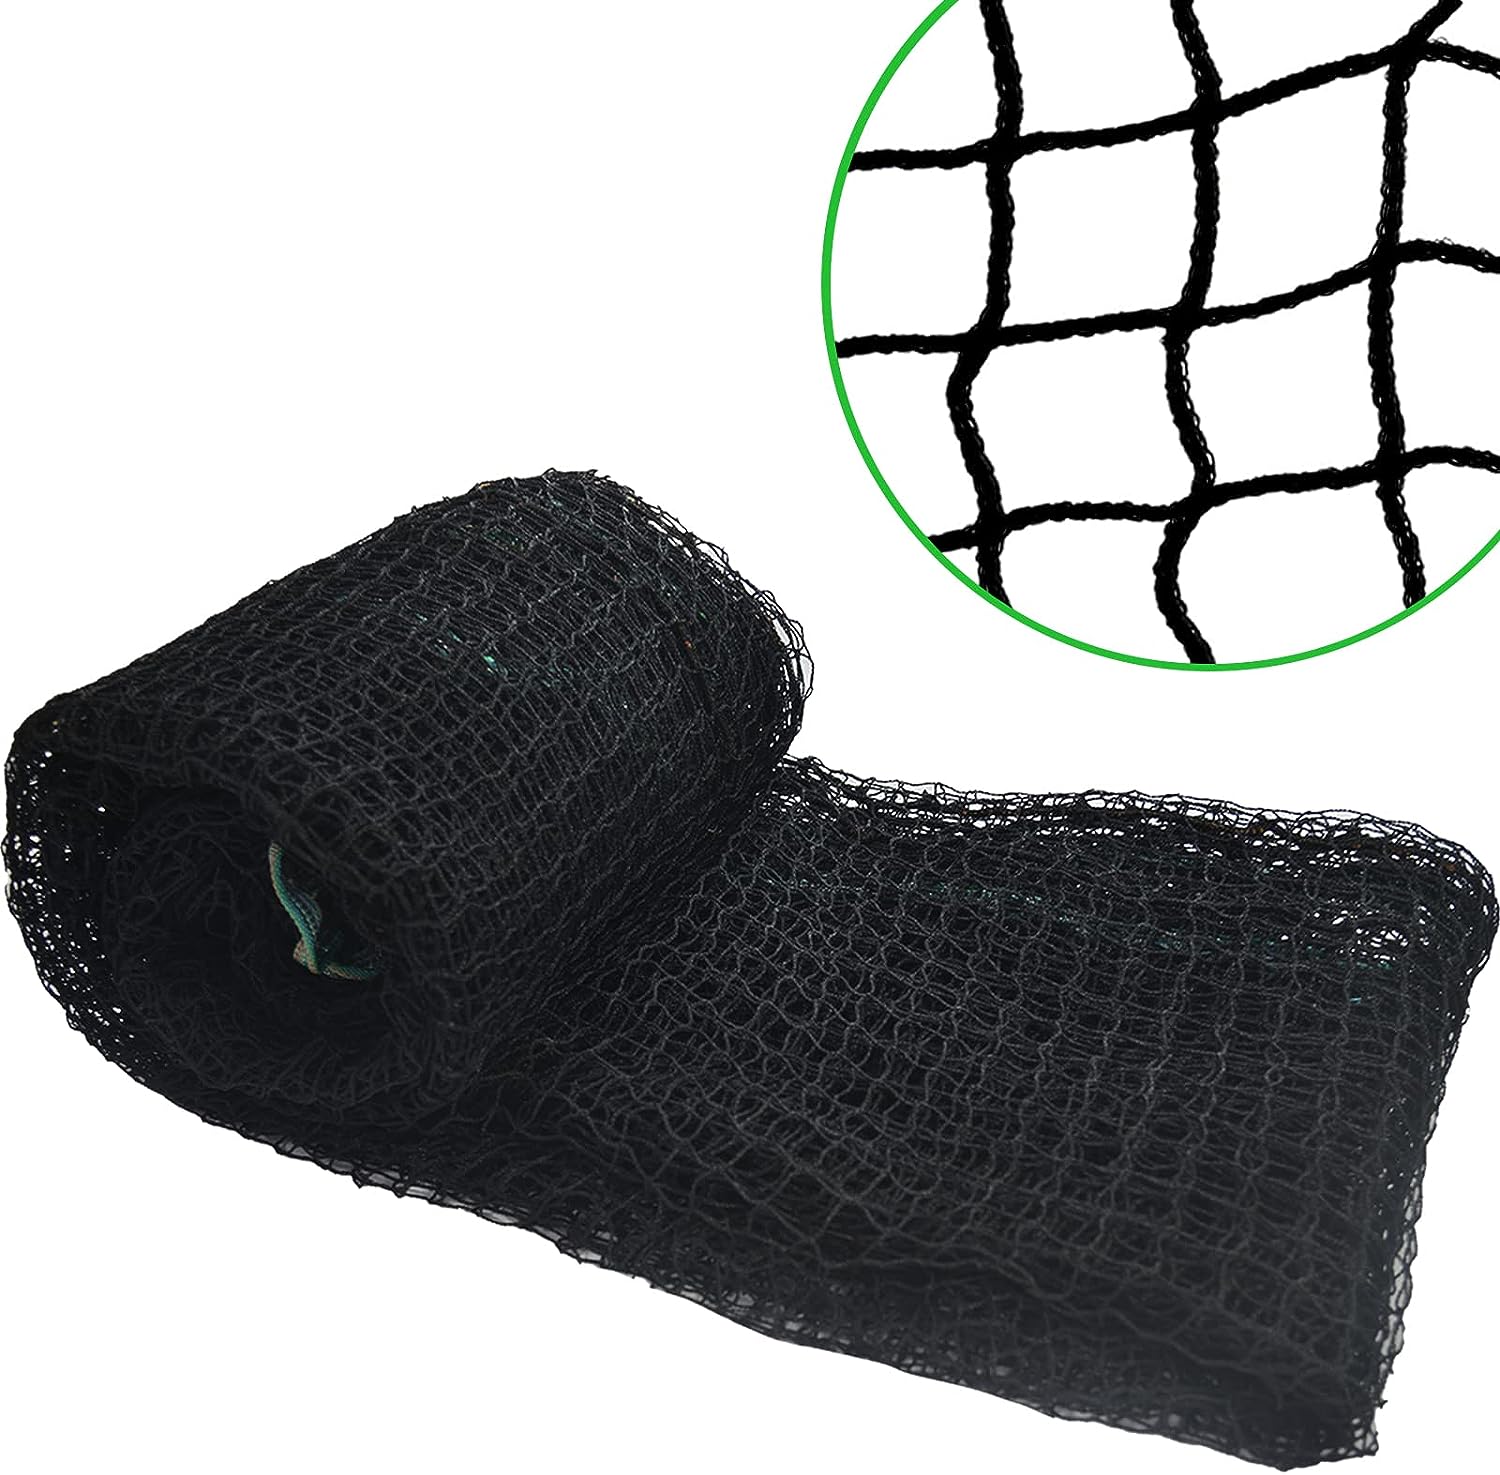 Baseball Batting Cage Netting, Heavy-Duty Sports Barrier Nets 30x 12ft,Portable Backstop Net Large Replacement Netting for Batting Cage Series